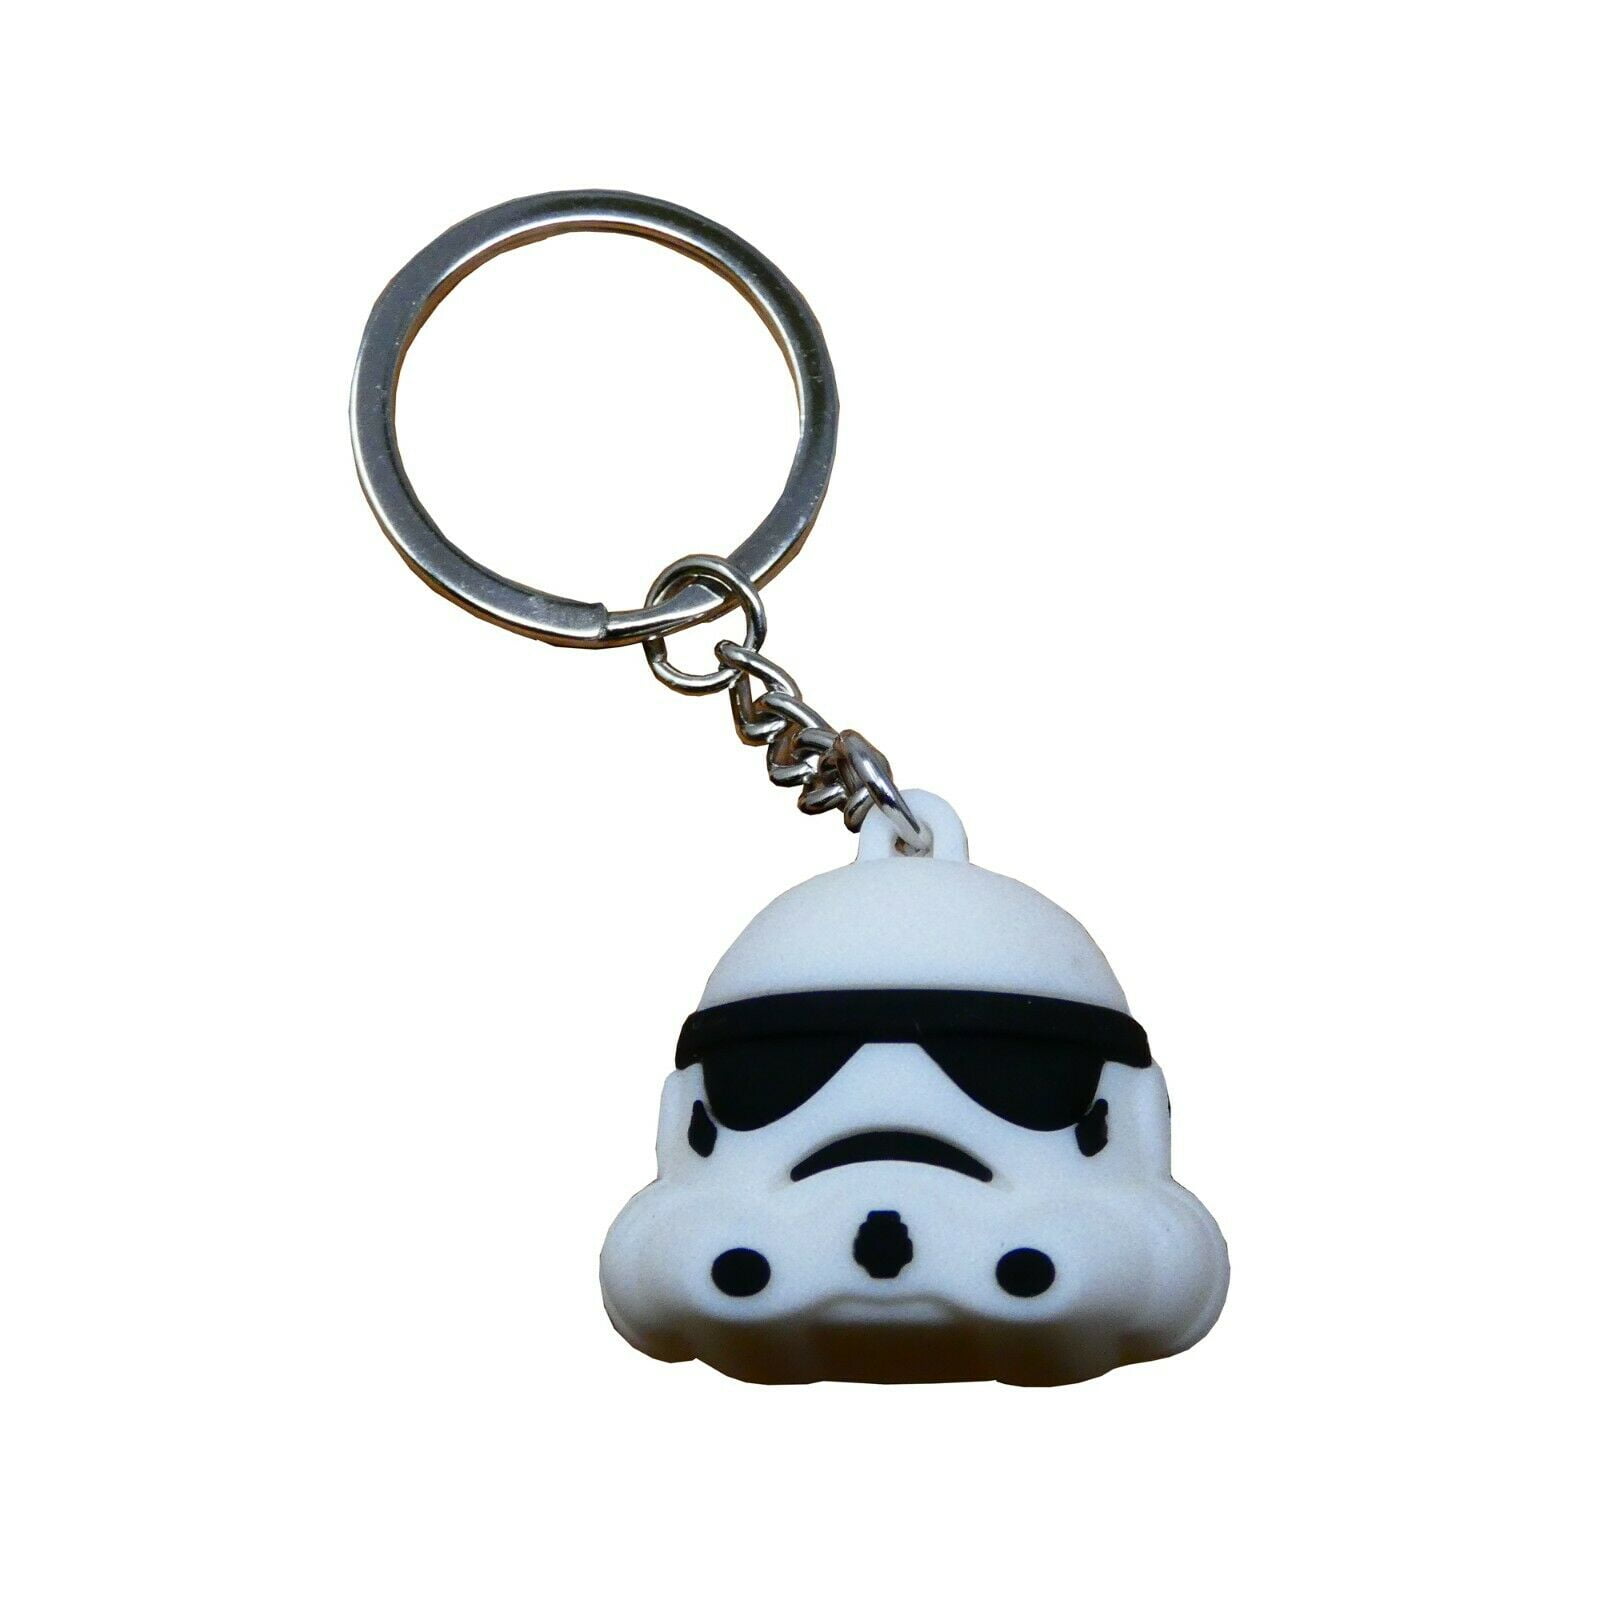 Details about   BB-8 Talking Plush Key Chain Clip On Star Wars 